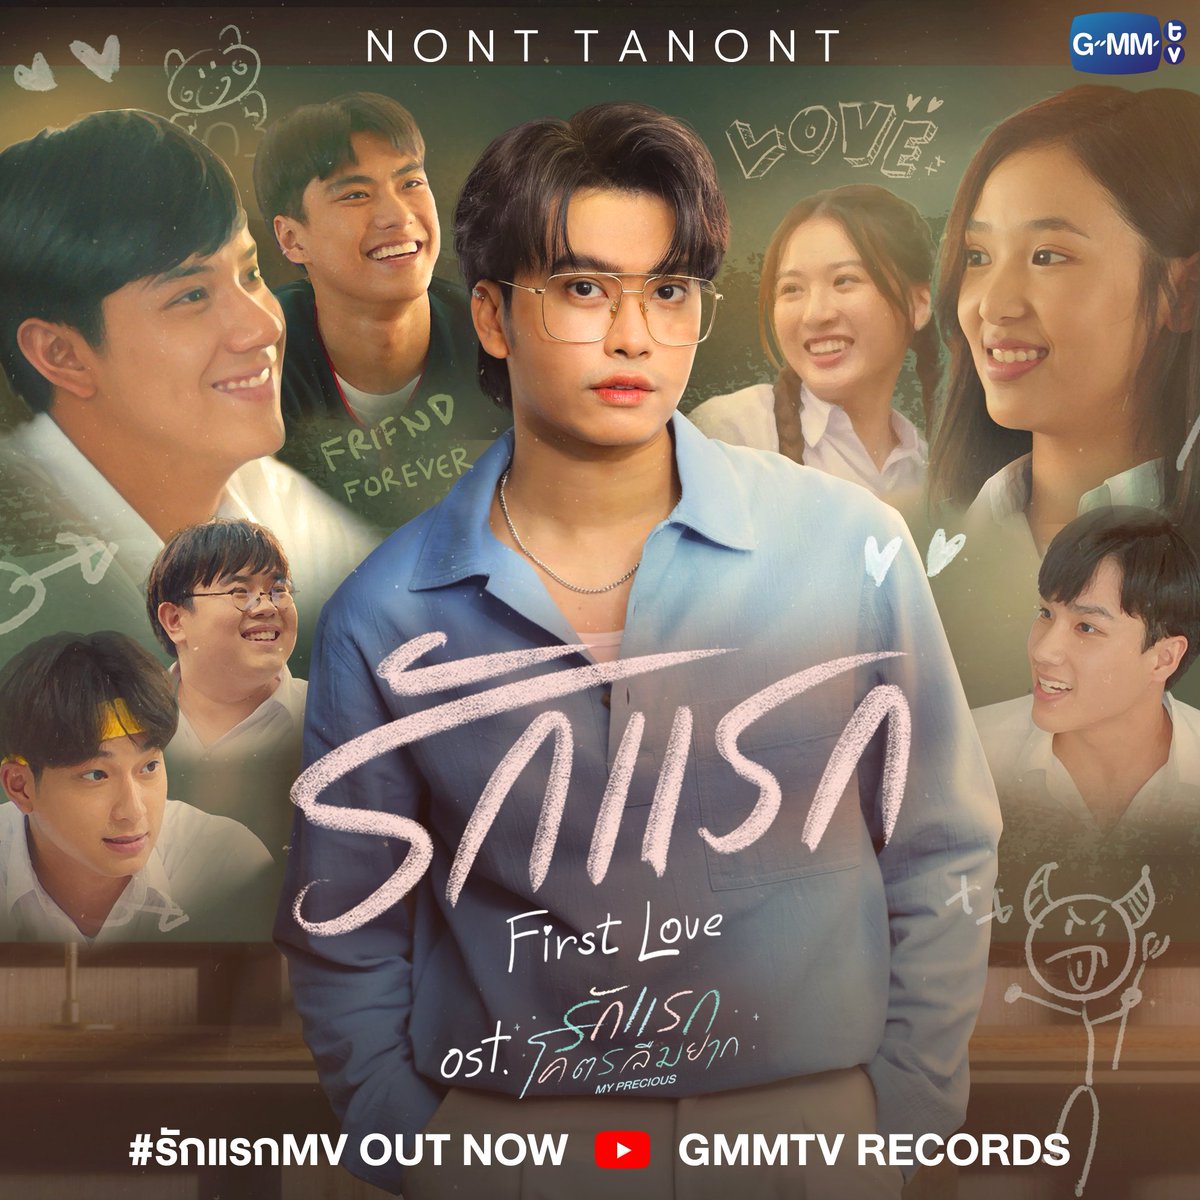 Big congratulations with  #doublehappiness to @tanont916 and his team. Today you have a new ost release, and another 100-million view MV on YouTube. 

Many more new songs and performance to come, I am delighted you have worked hard and learned to become a happy you. #NONTTANONT